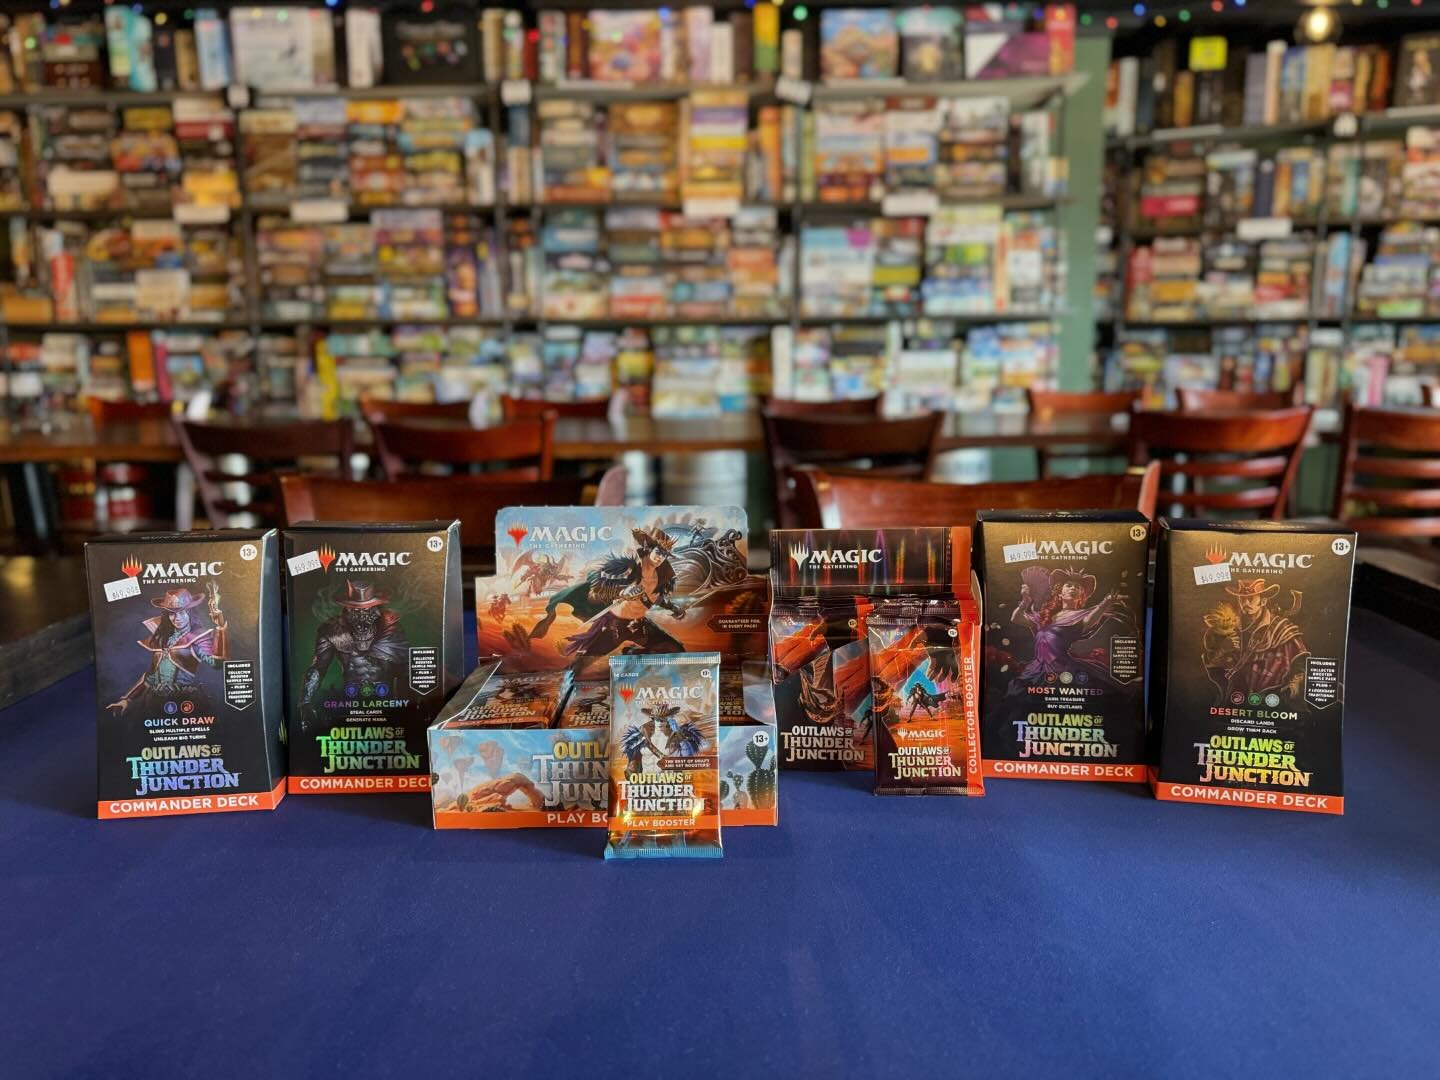 New Magic set, restock of the best selling $20 game we&rsquo;ve ever had in the shop (perfect for outdoor gaming season!), and some new fancy upgrade kits for Flamecraft.

We&rsquo;re going to put in some restock orders of dice next week; we&rsquo;re